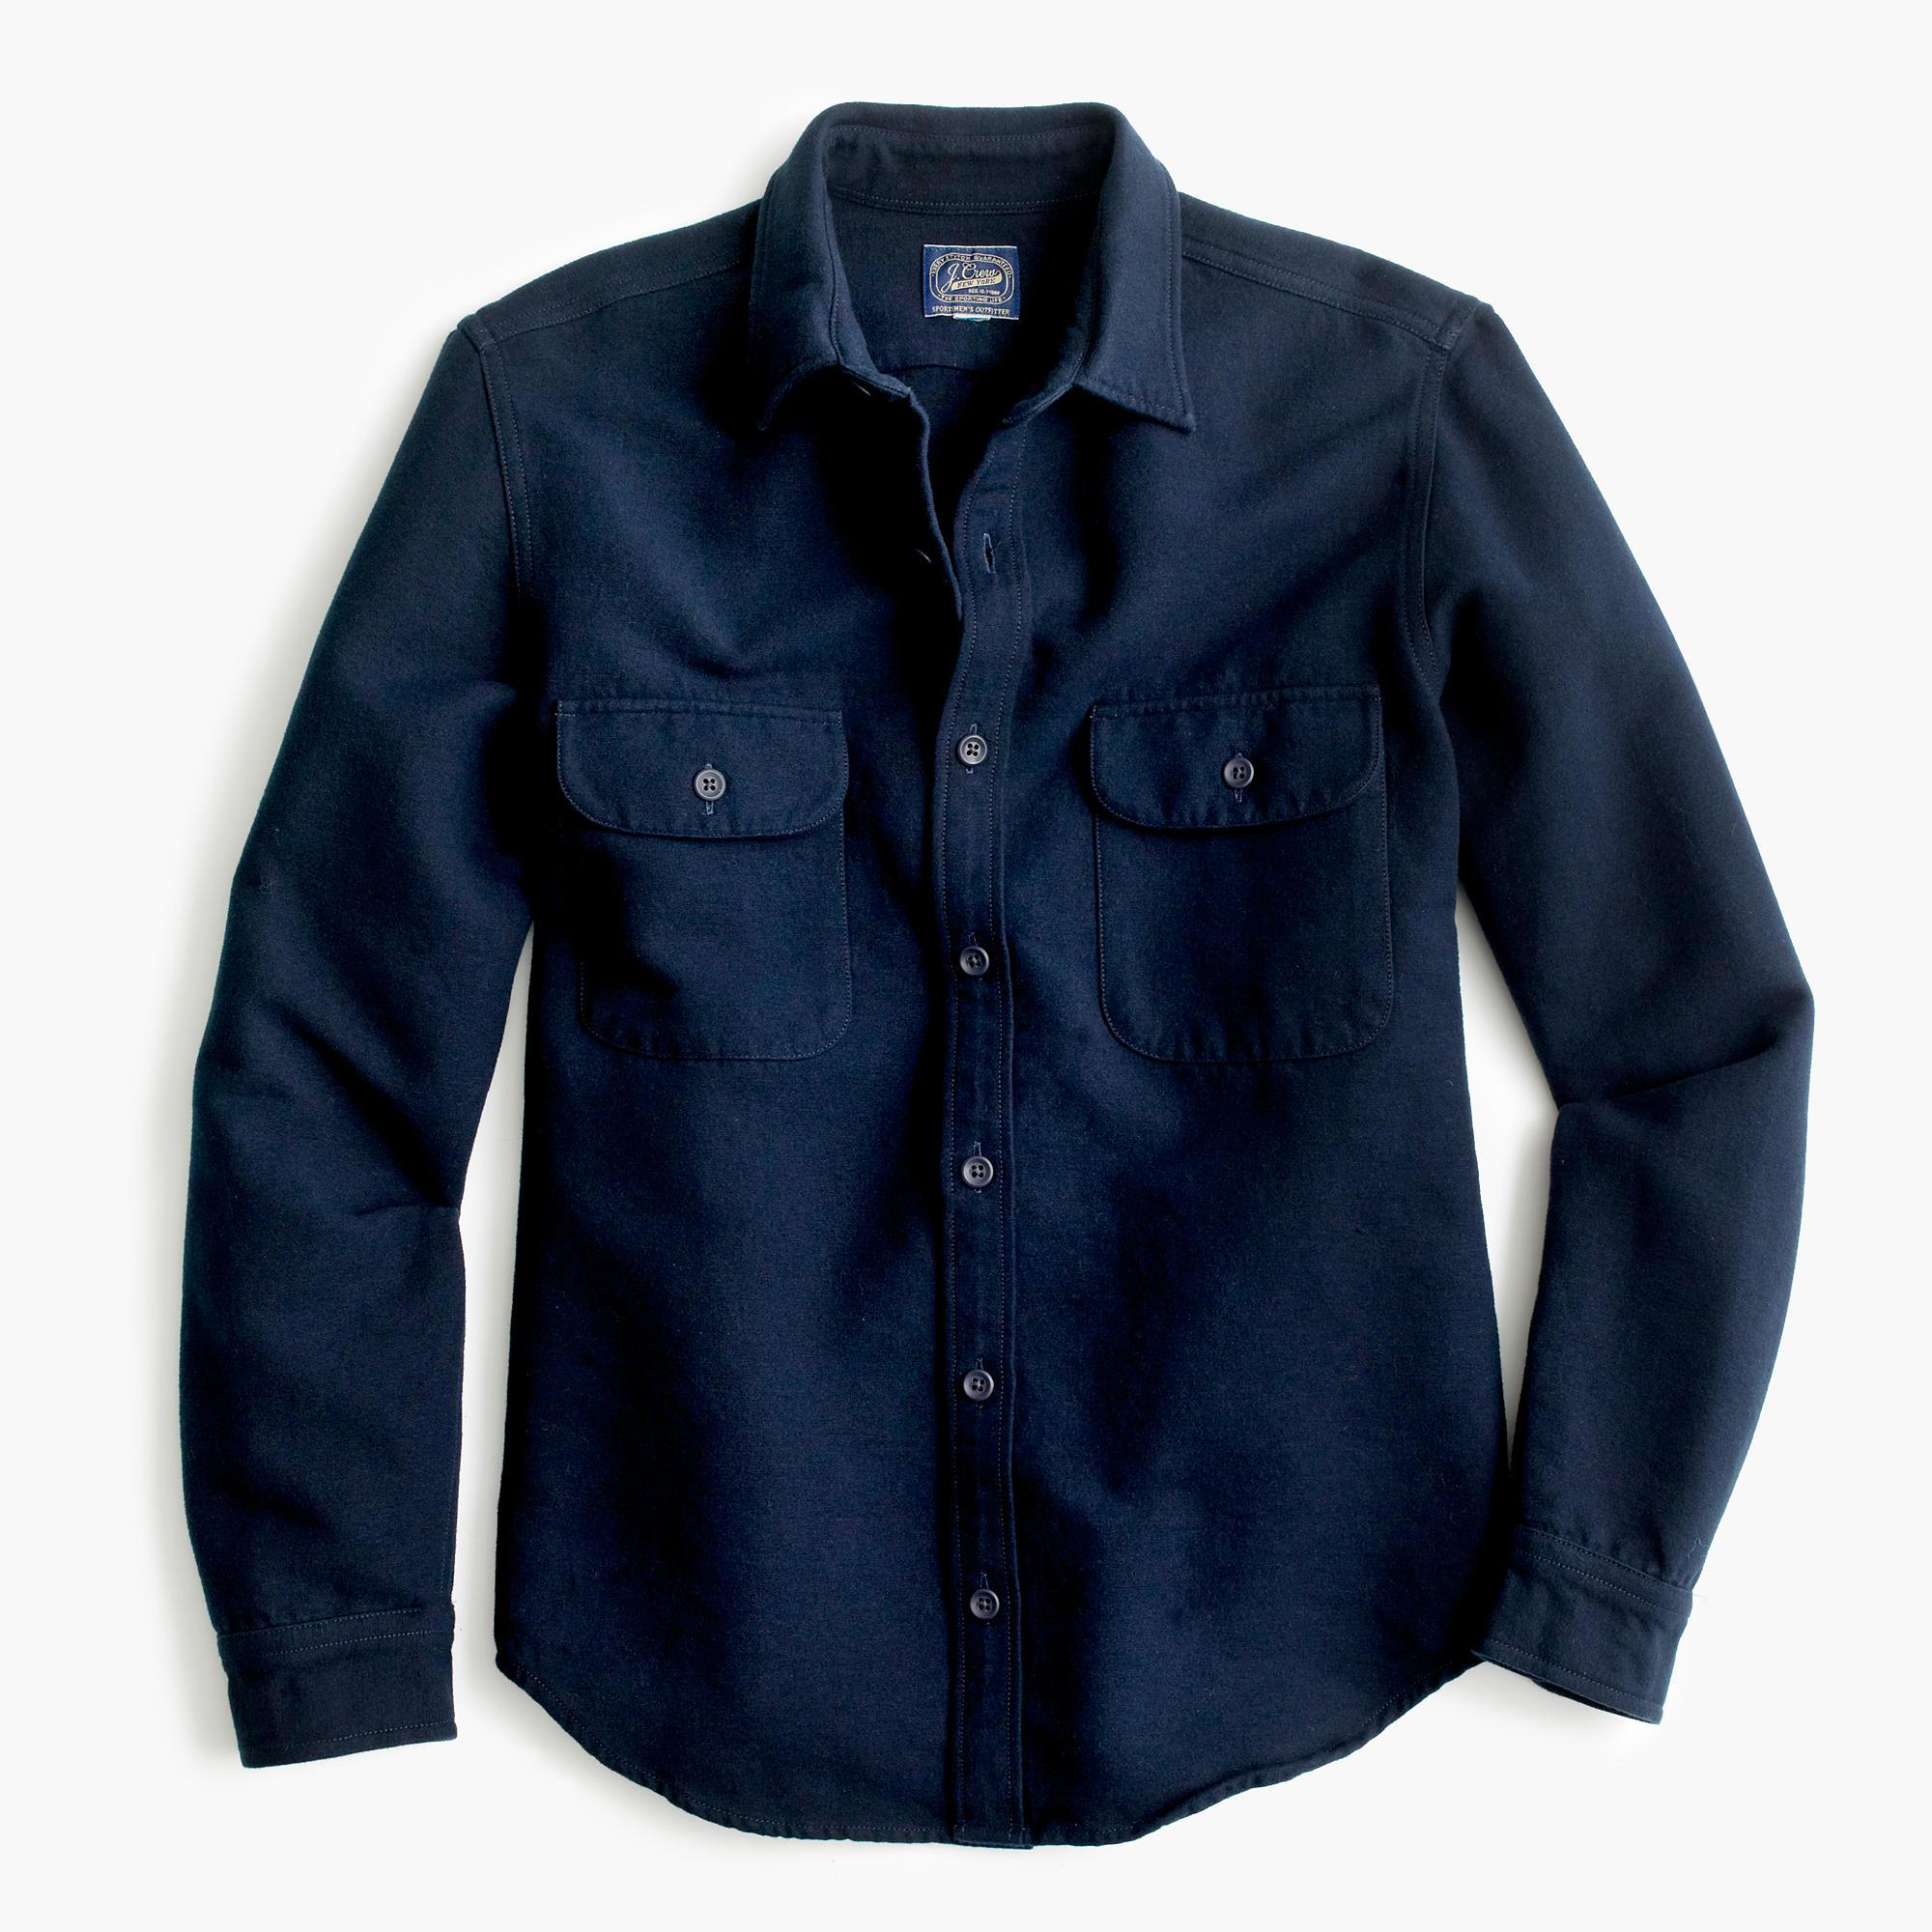 J.Crew Leather Heavyweight Chamois Shirt in Navy (Blue) for Men - Lyst